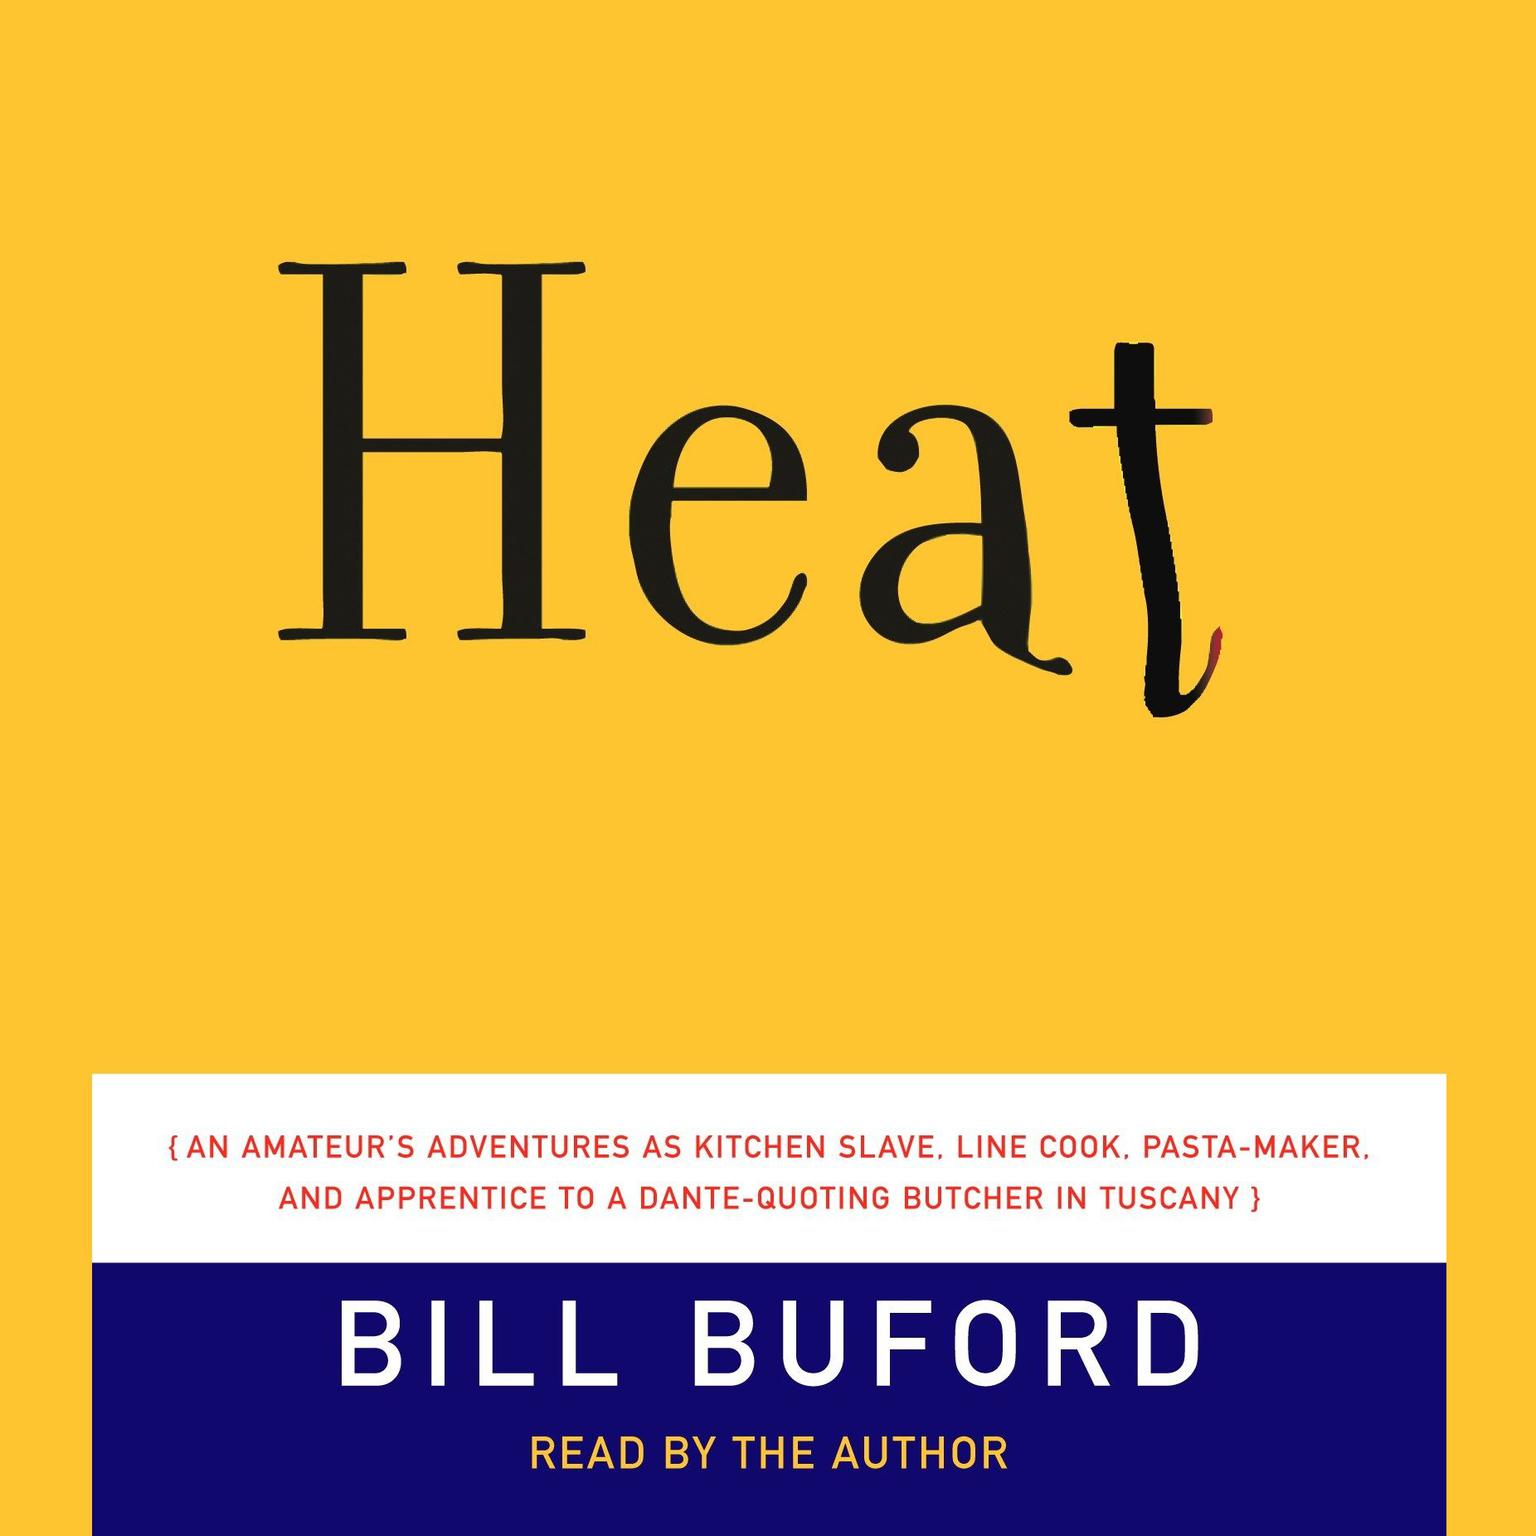 Heat (Abridged): An Amateurs Adventures as Kitchen Slave, Line Cook, Pasta-Maker, and Apprentice to a Dante-Quoting Butcher in Tuscany Audiobook, by Bill Buford